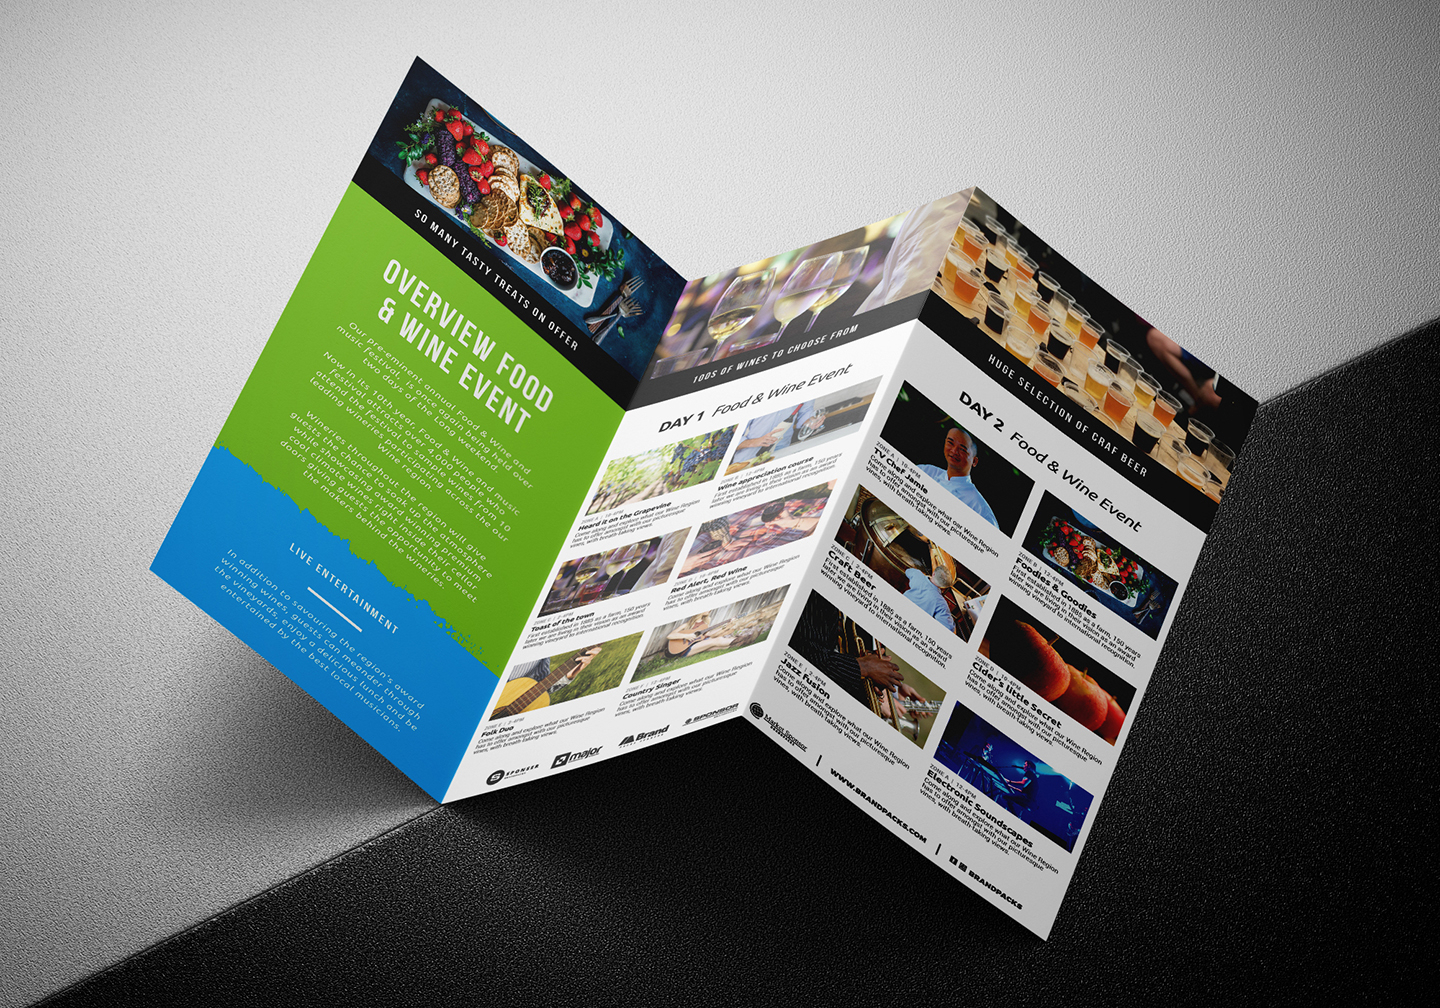 Free Tri Fold Brochure Template For Events & Festivals – Psd Throughout Tri Fold Brochure Template Illustrator